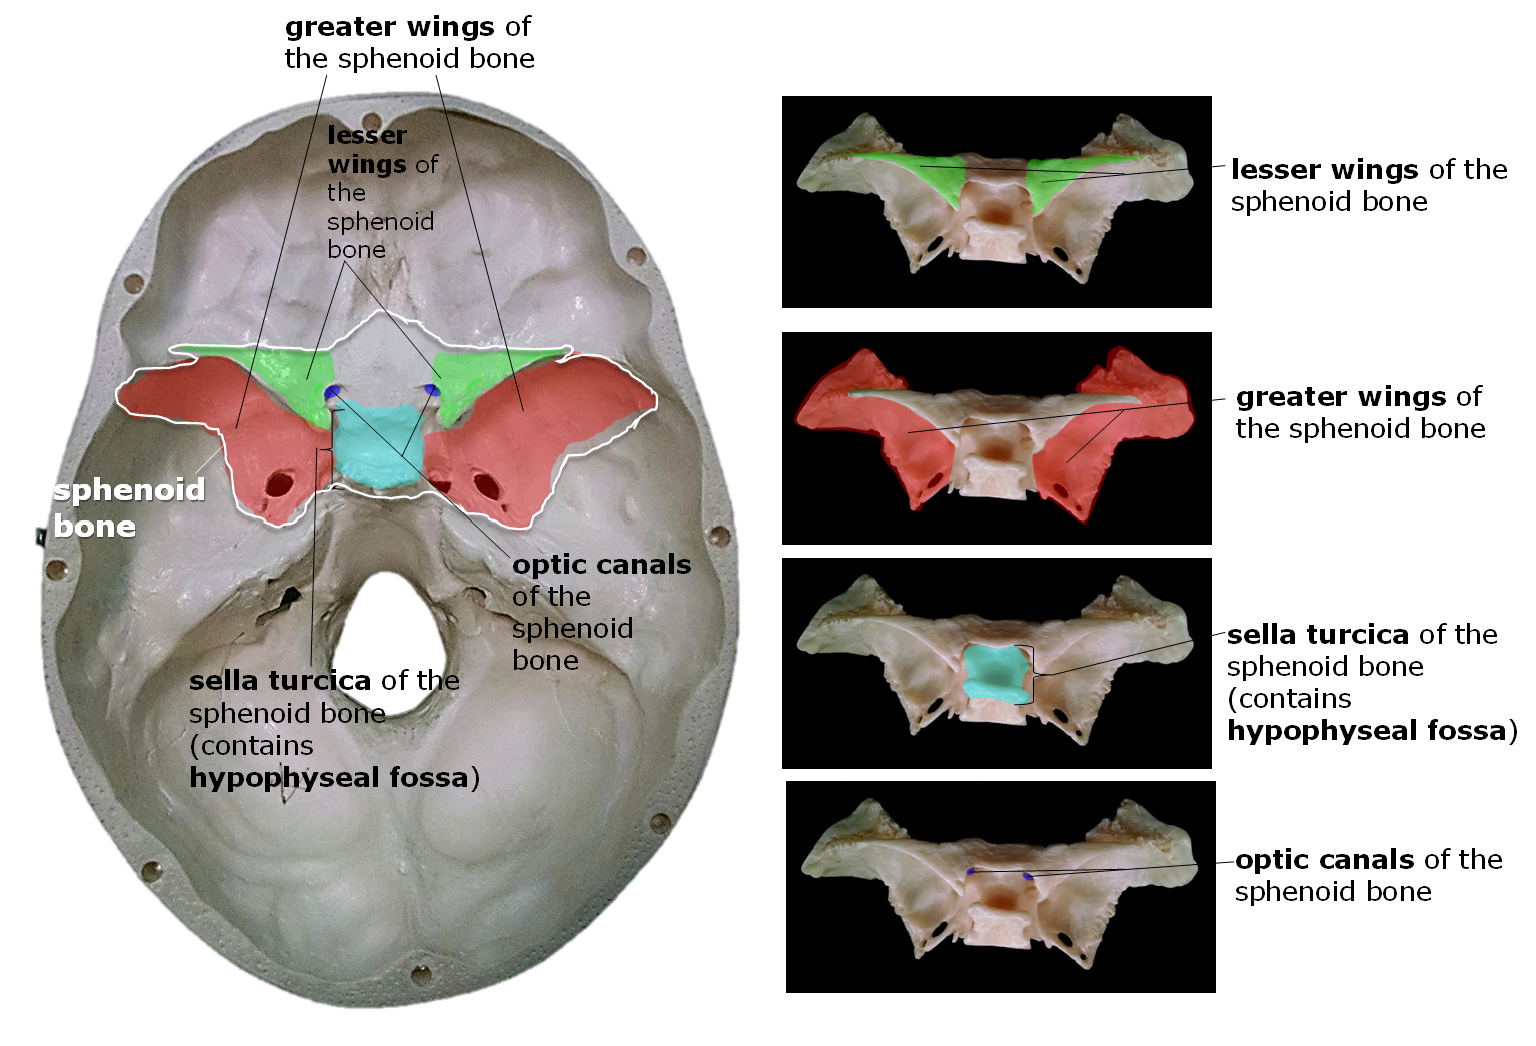 Position of the sphenoid bone from the view of the cranial cavity.